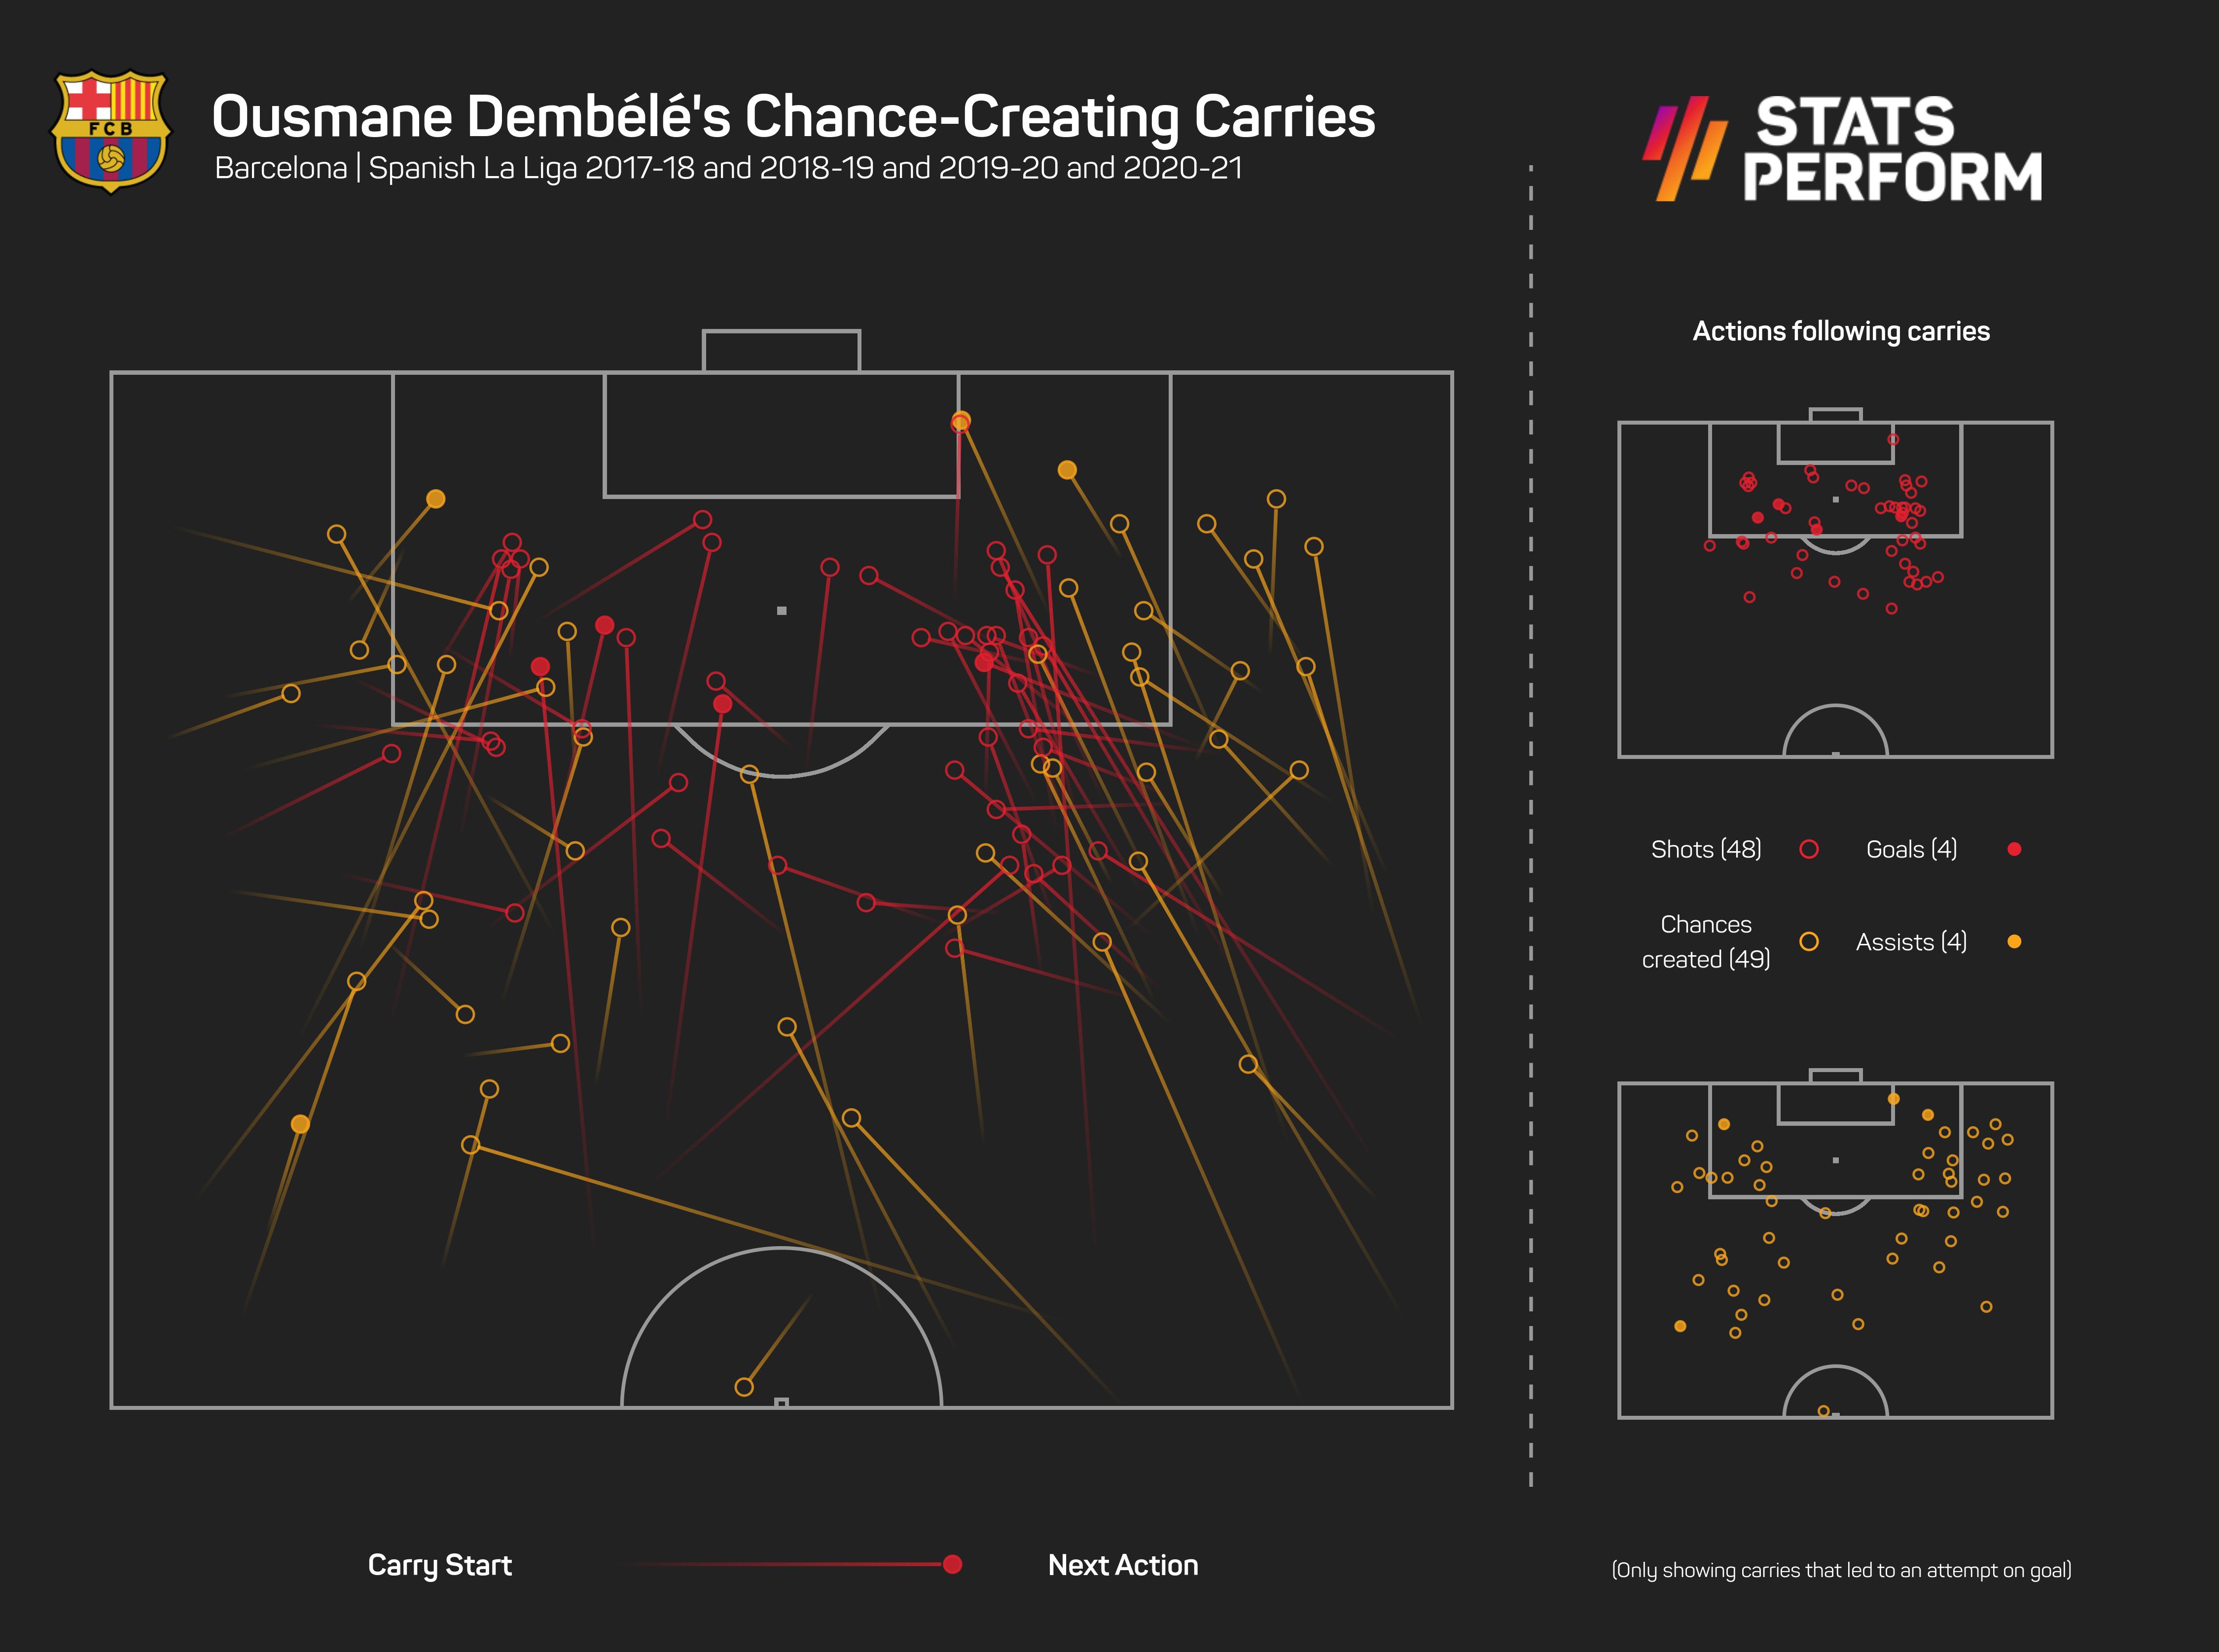 Ousmane Dembele chance-creating carries for Barcelona in LaLiga